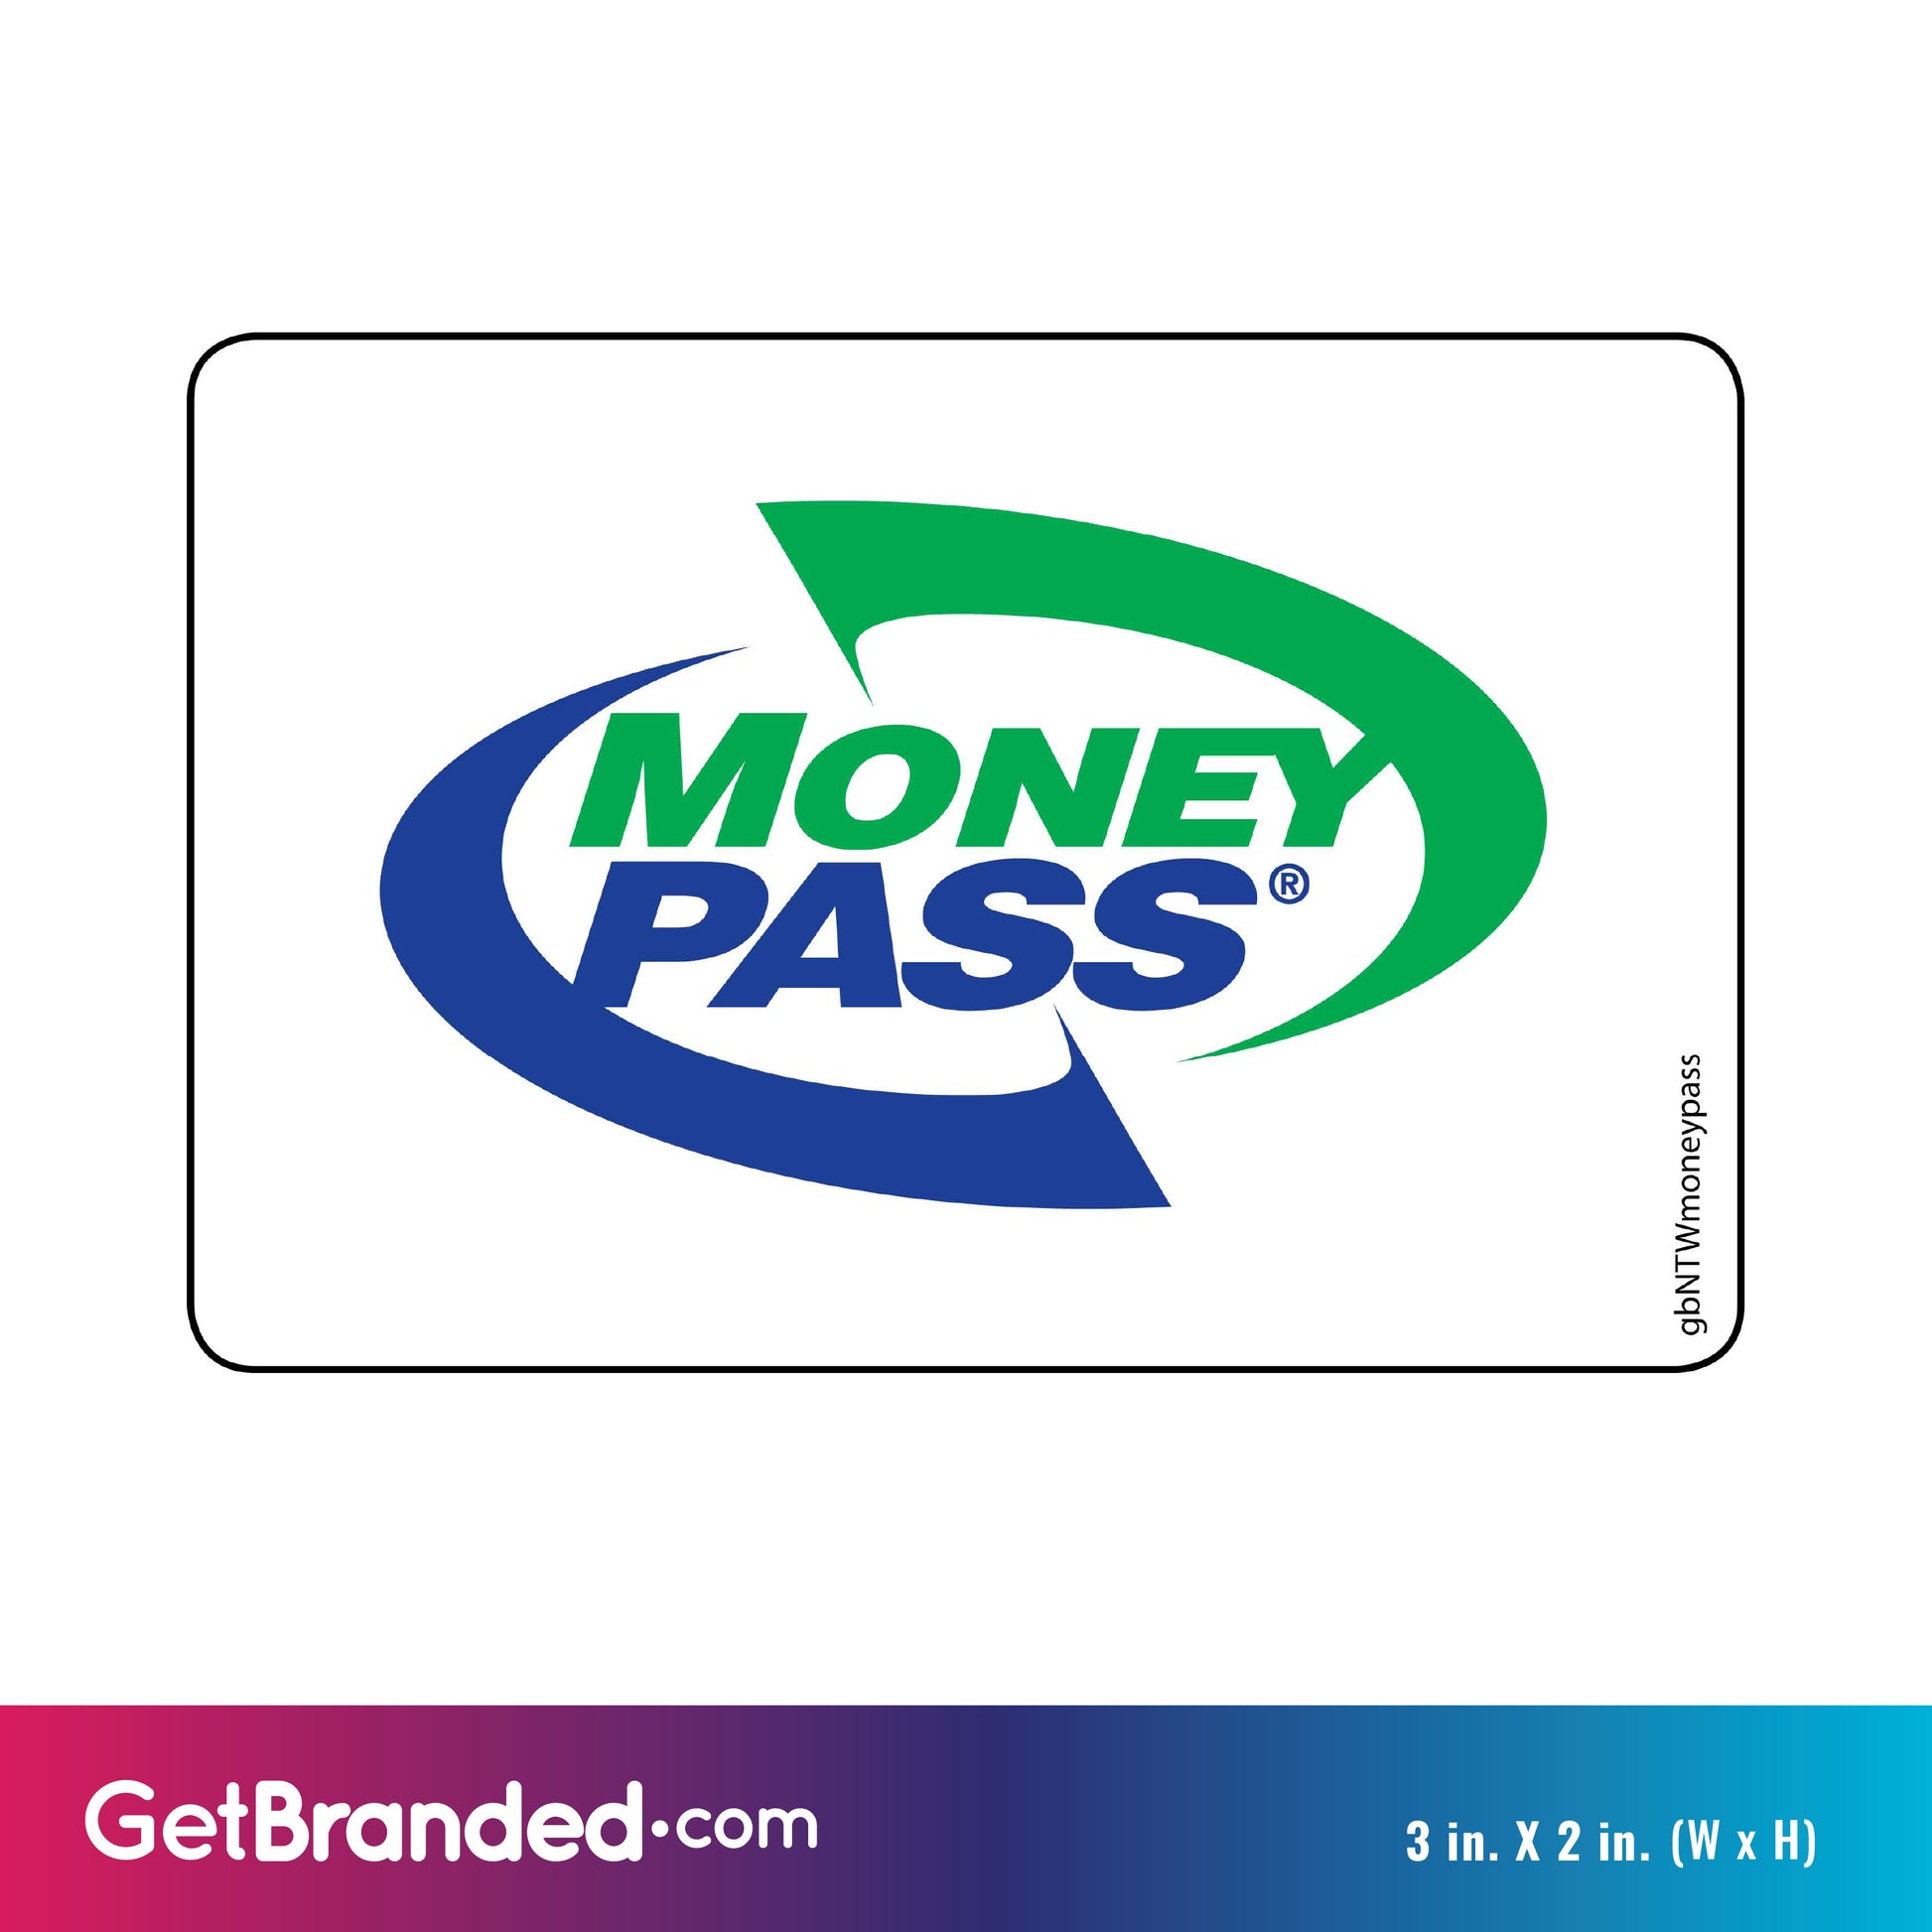 Single Network Decal, Moneypass size guide.